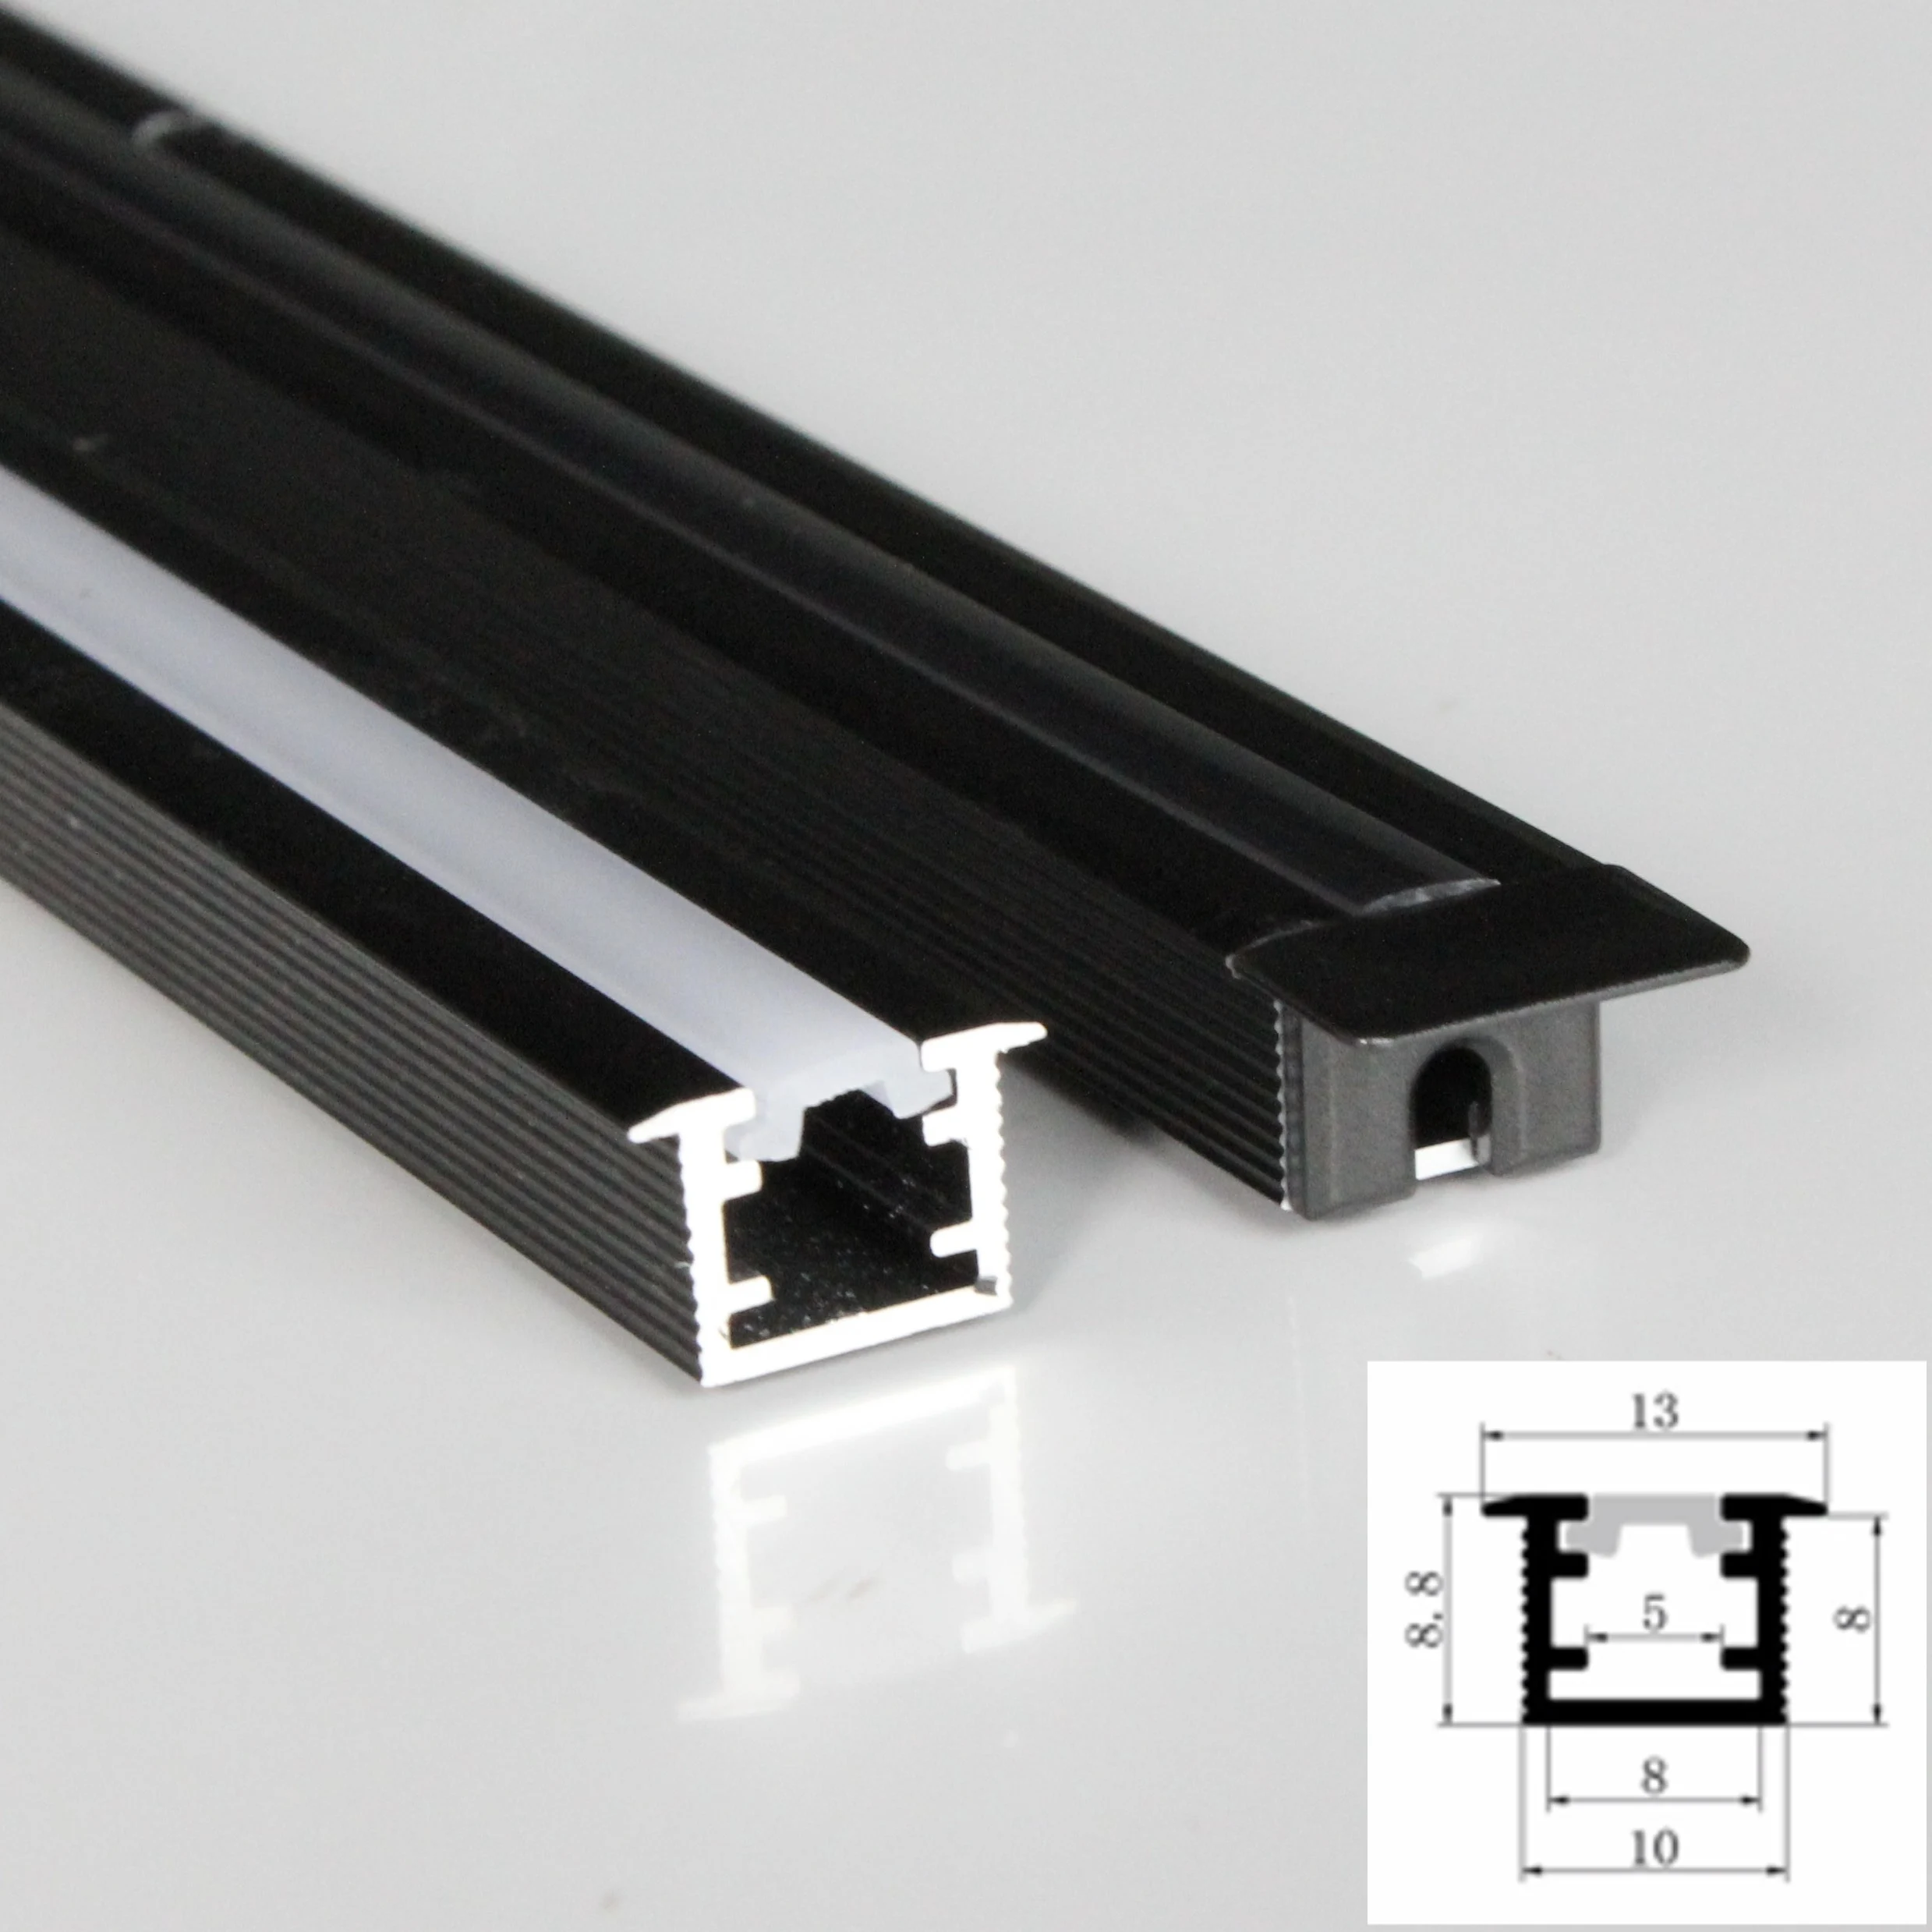 30m (30pcs) a lot, 1m per piece, black led aluminum profile for led strips with milky diffuse cover